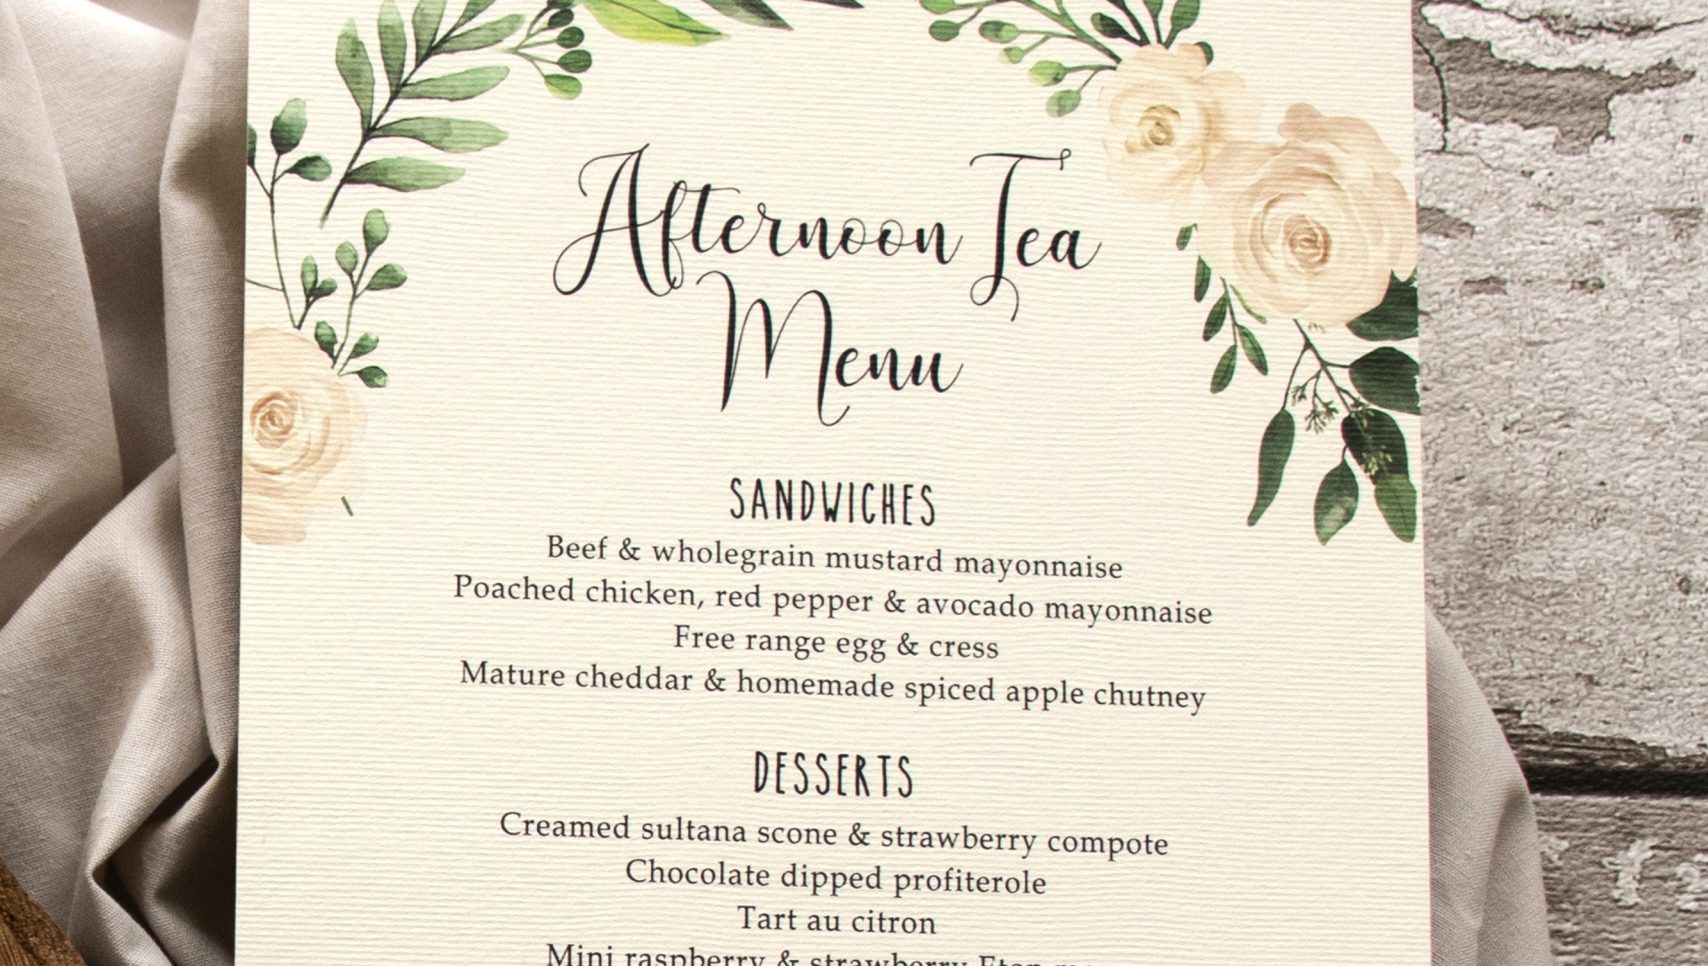 How to Host an Afternoon Tea Party: Tips and Must-Haves